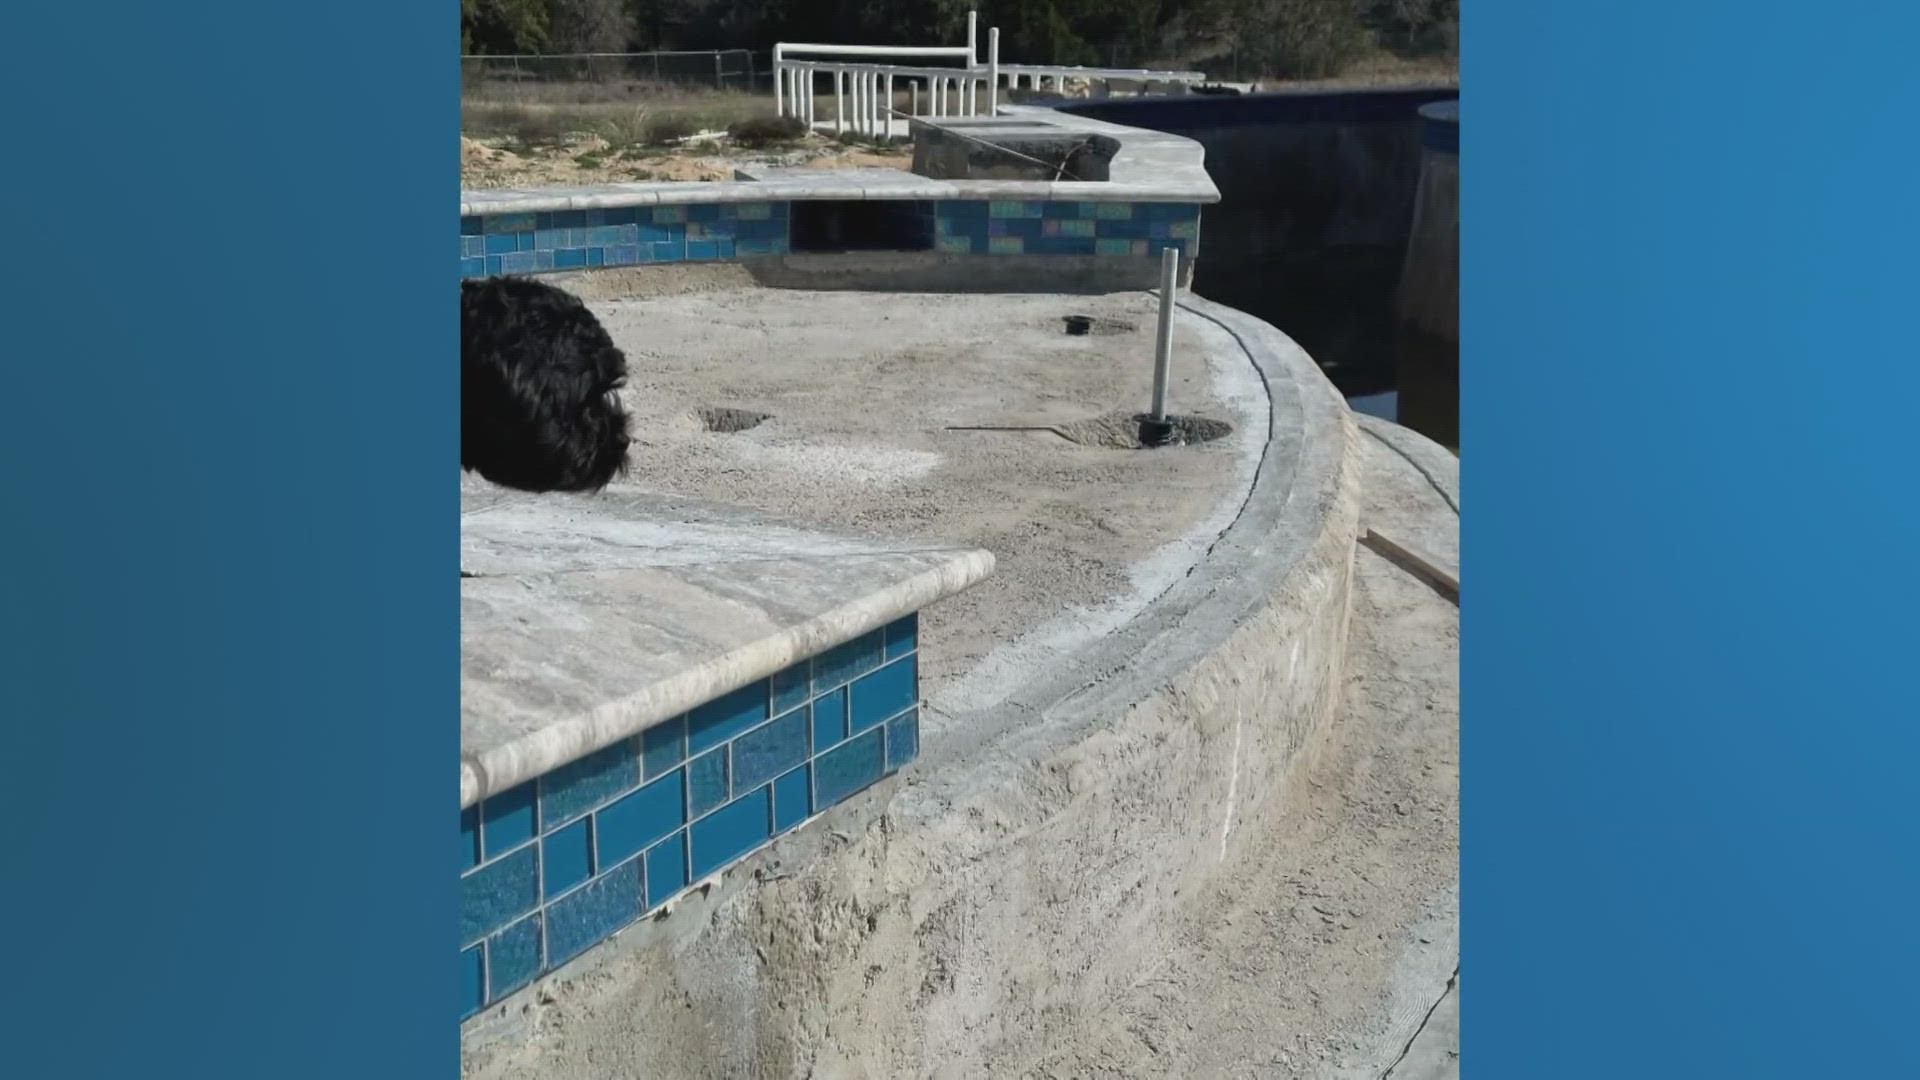 The customers allege that the company failed to complete pools, leaving them out thousands of dollars.